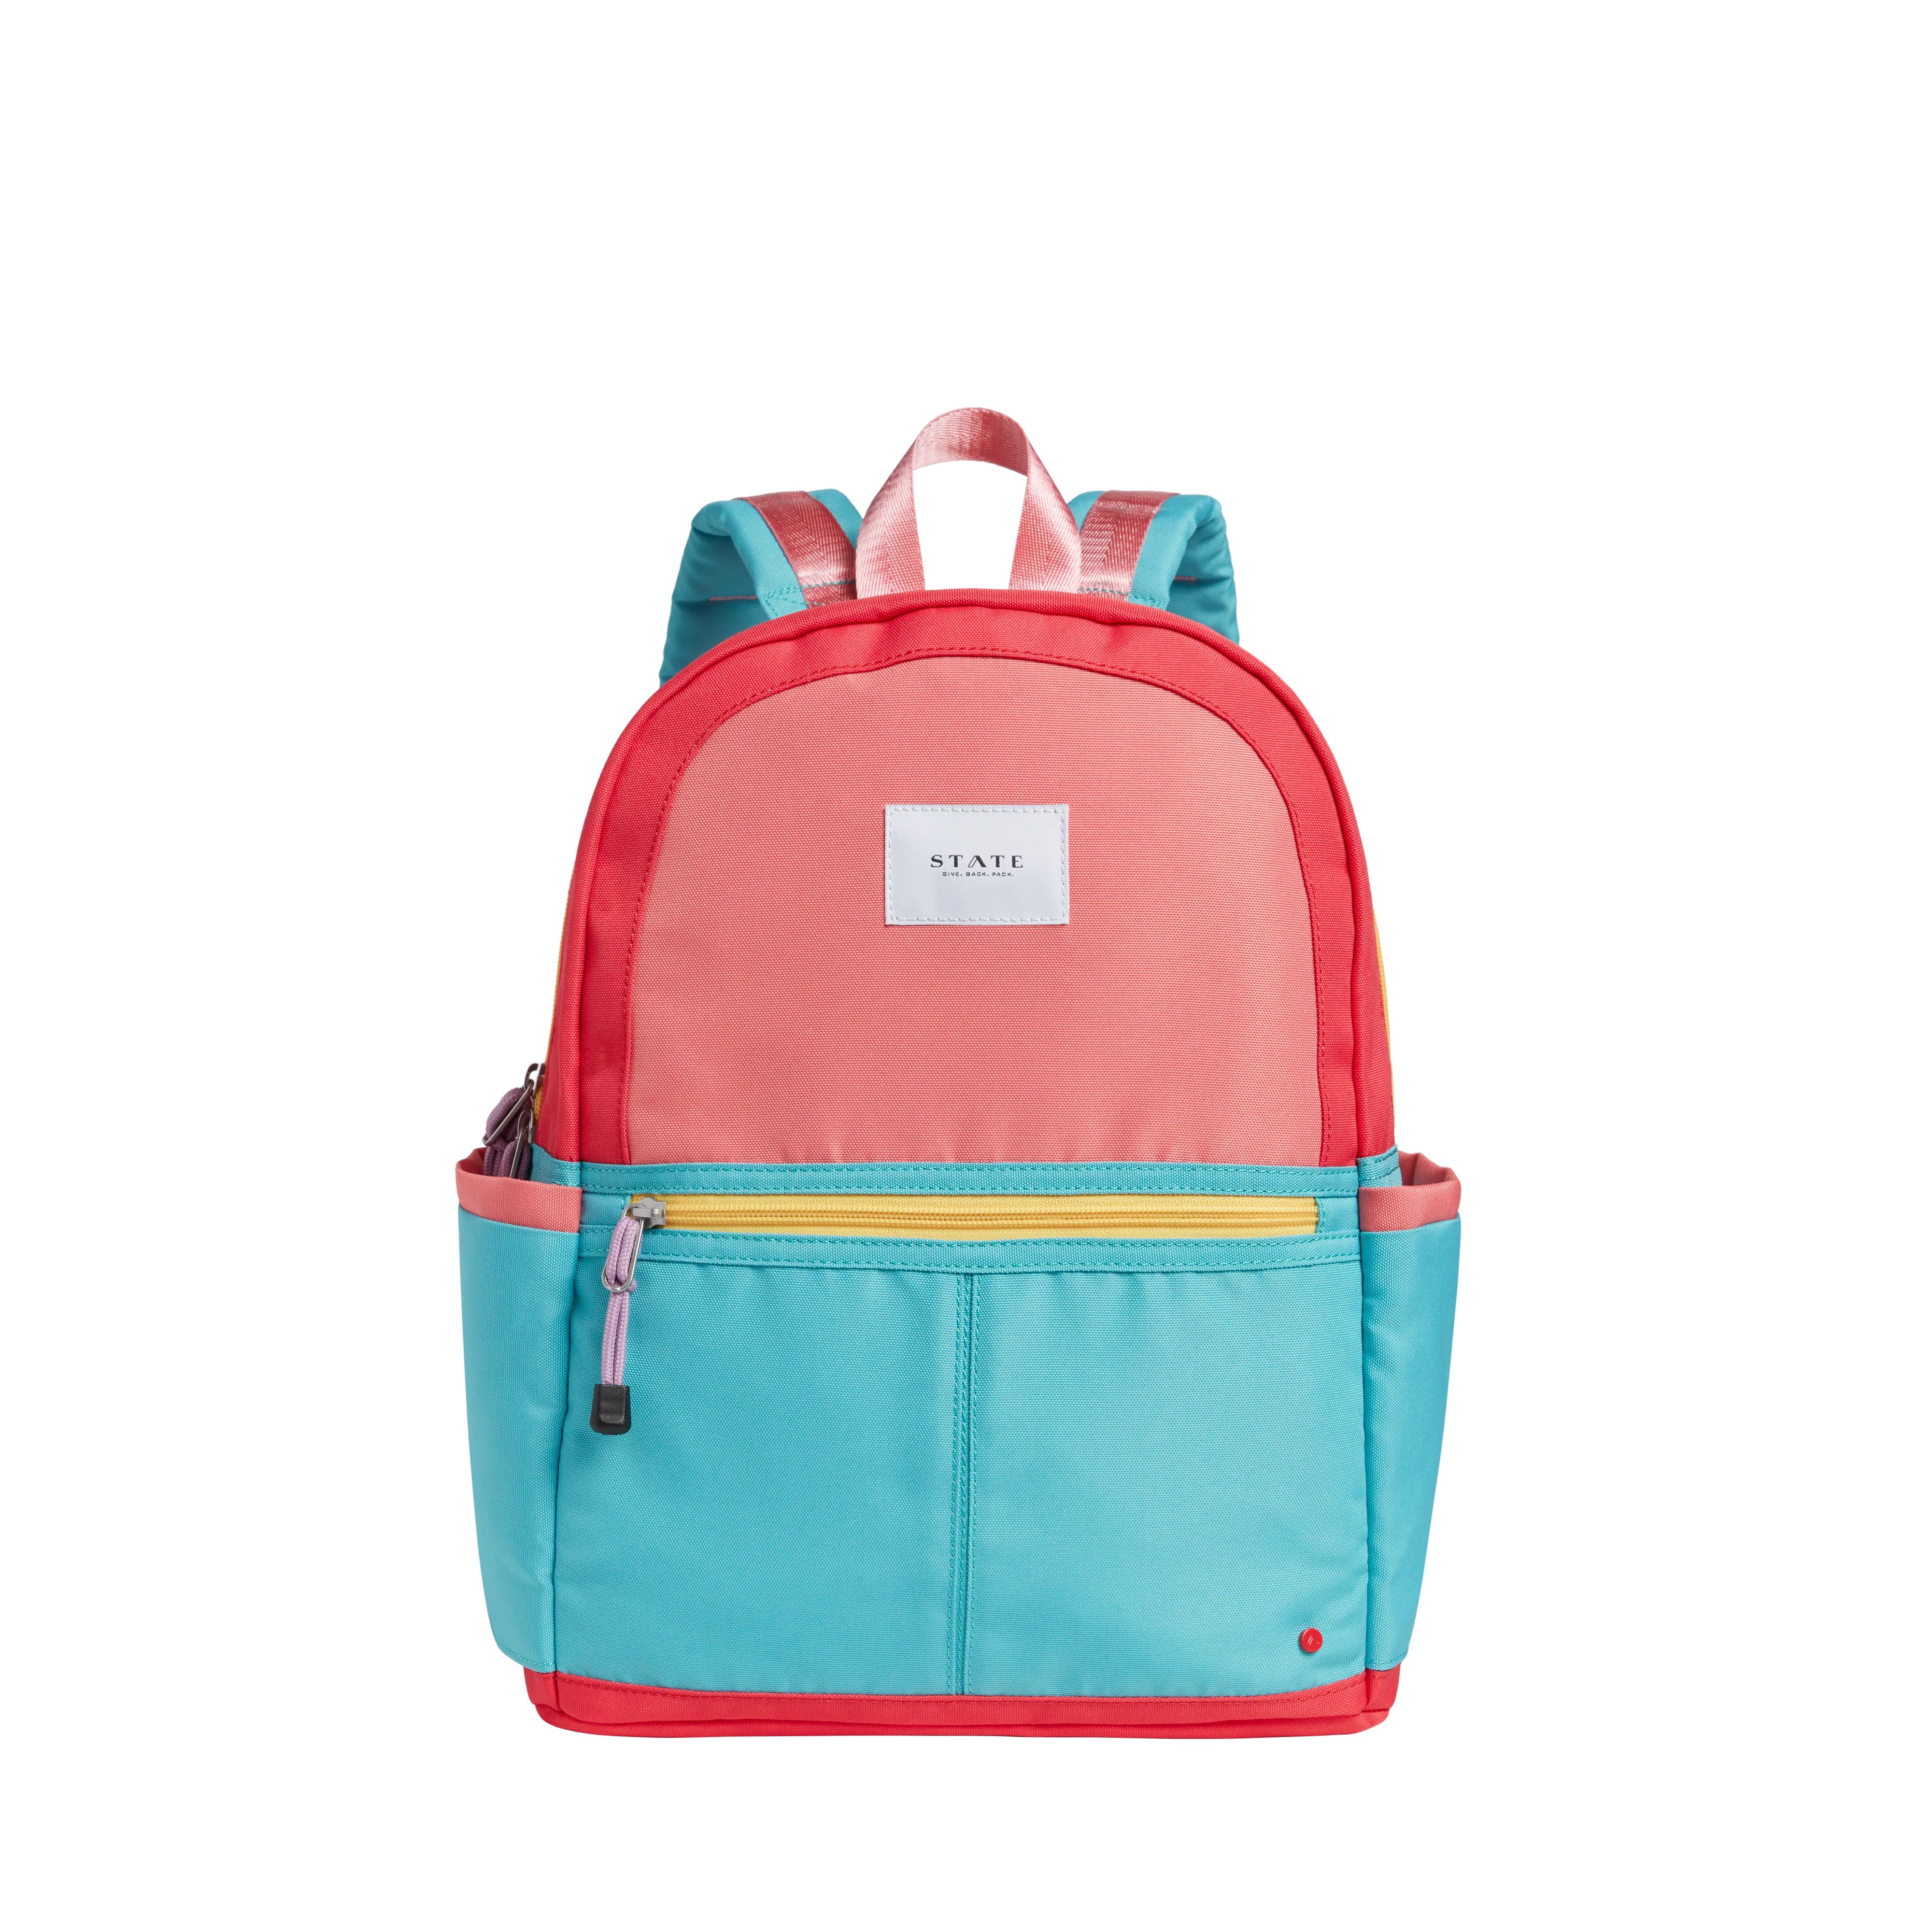 STATE Bags | Kane Double Pocket Backpack Color Block Pink/Mint | STATE Bags